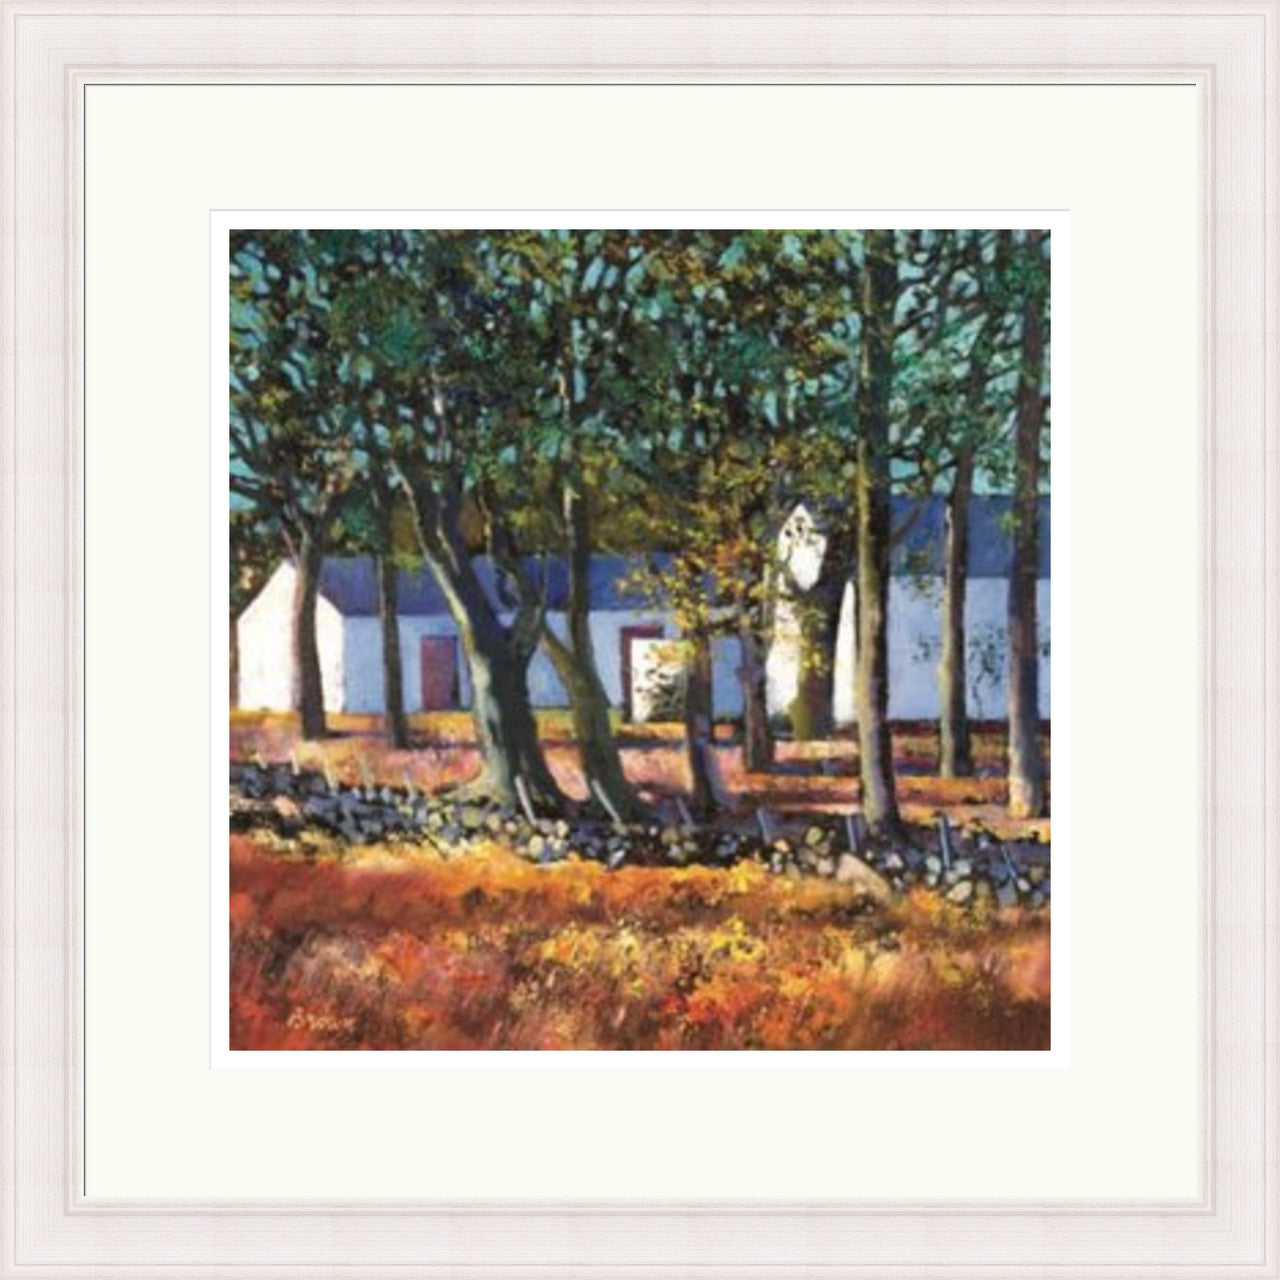 Farm Buildings through Trees (Limited Edition) by Davy Brown